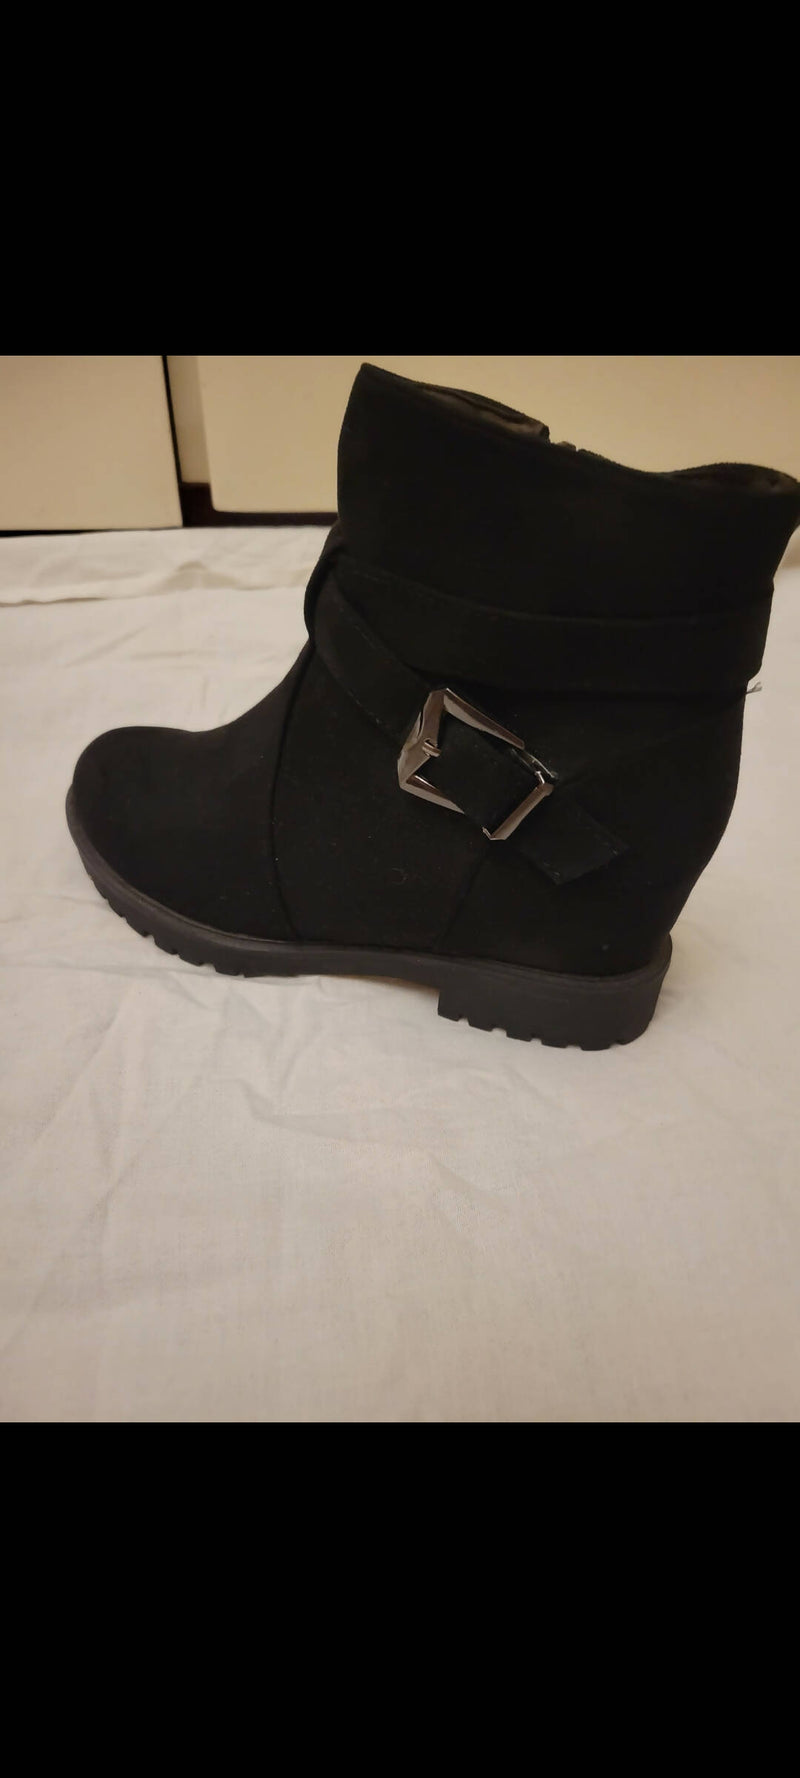 NEW Wedge Black Boots Size: 39